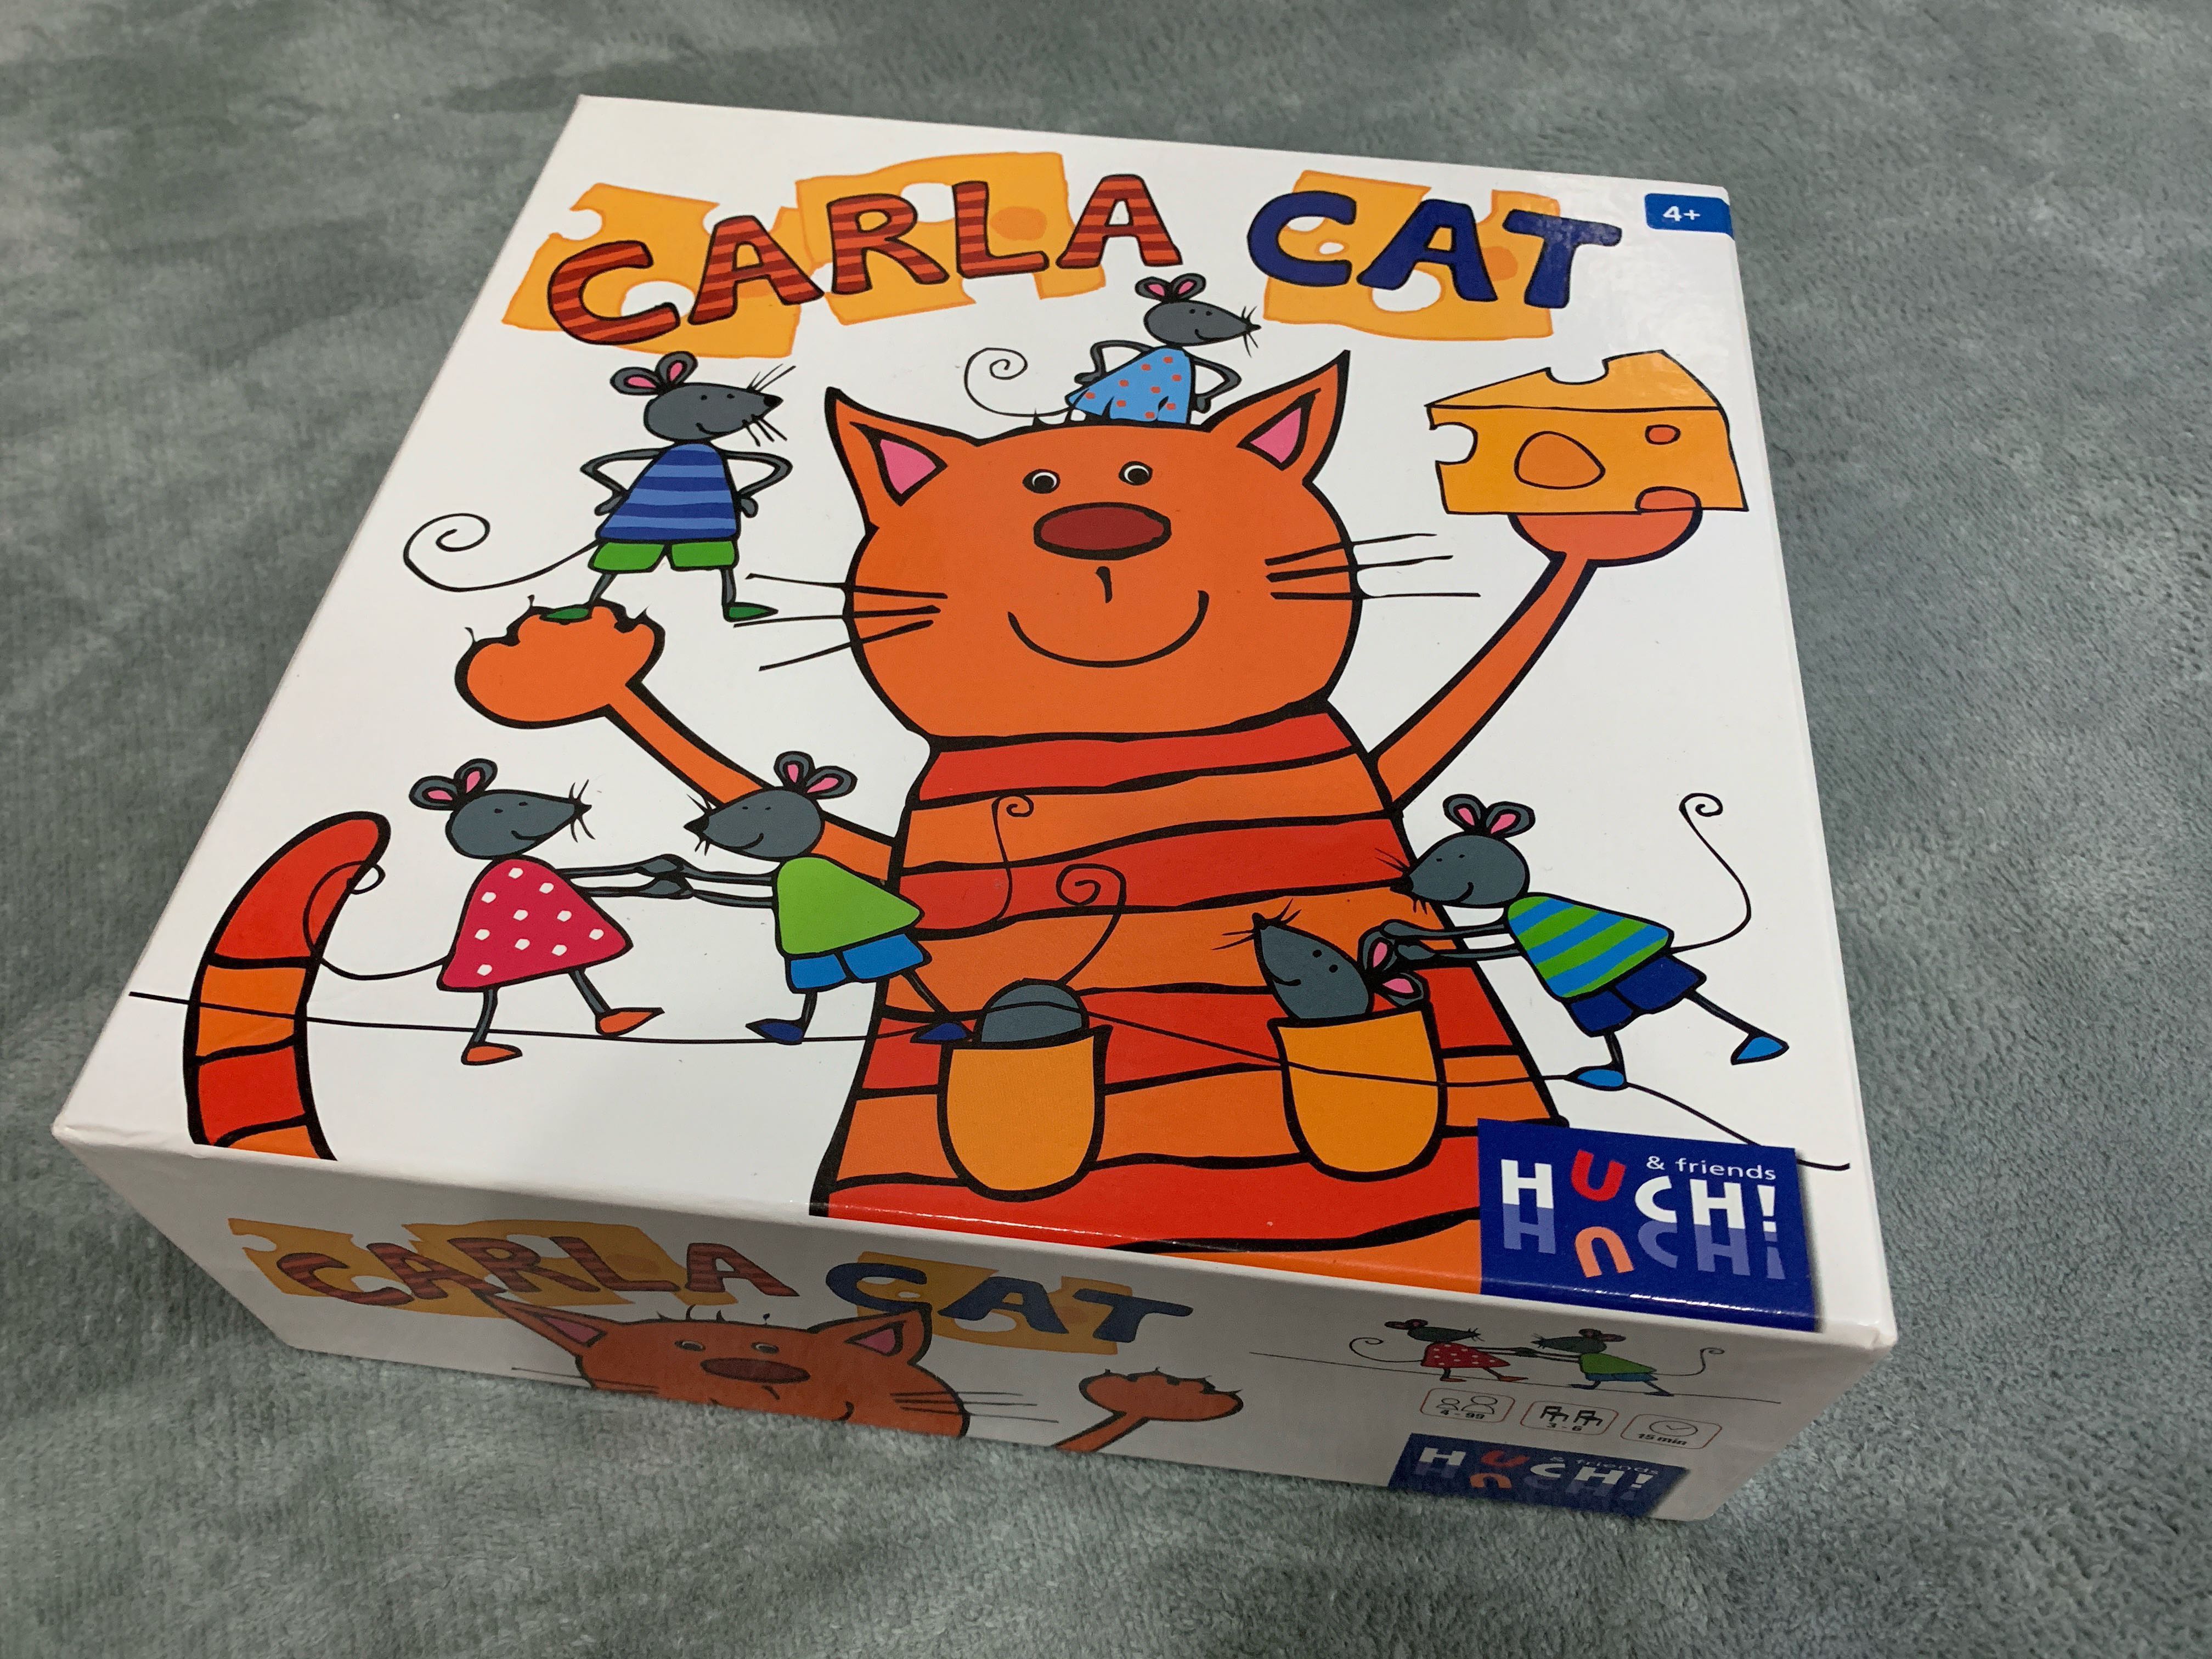 How to play Carla Cat, Official Game Rules